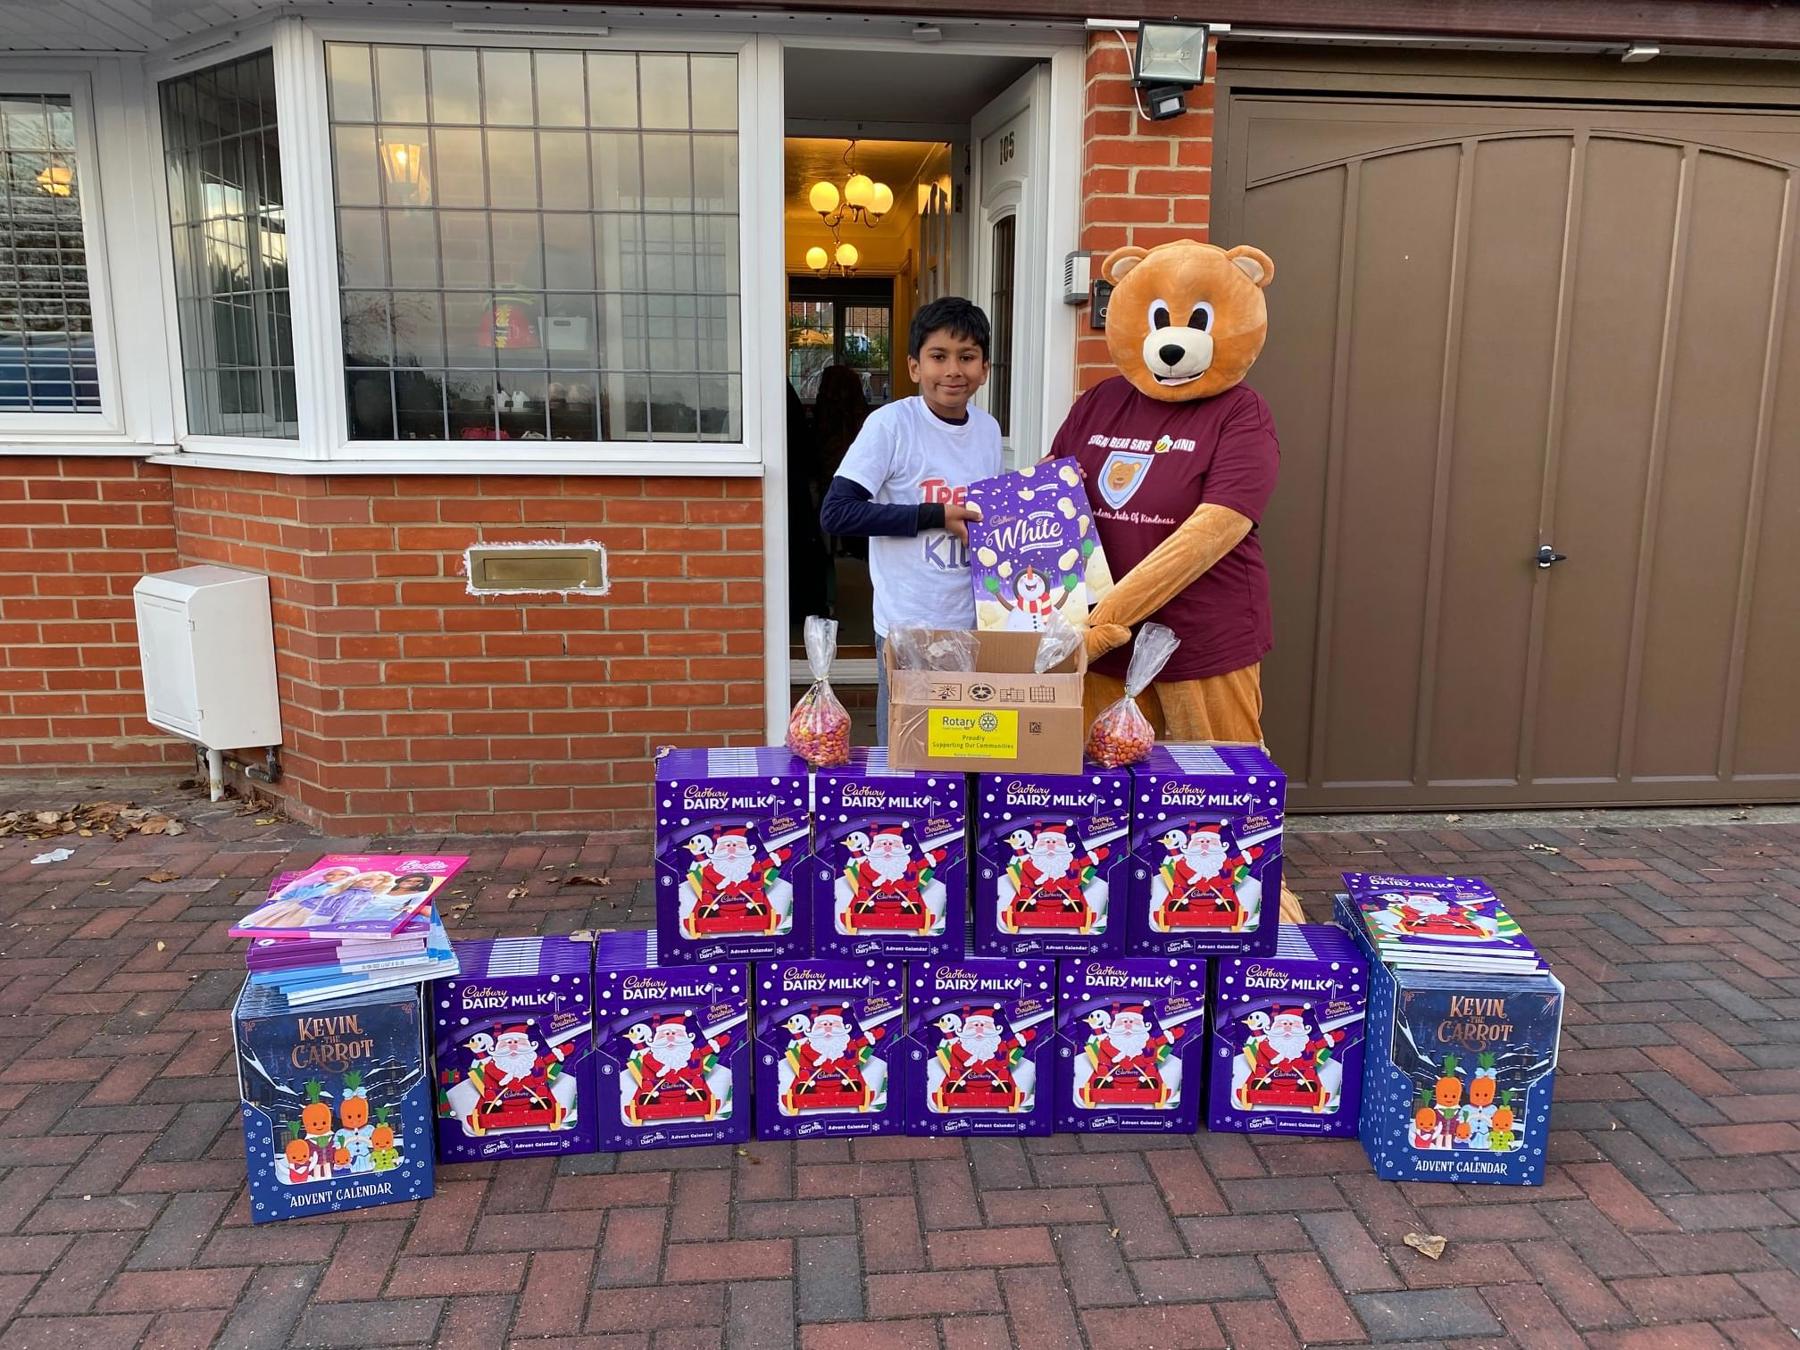 Neo is stood on the driveway with a teddy bear mascot with lots of advent calendars that have been donated.